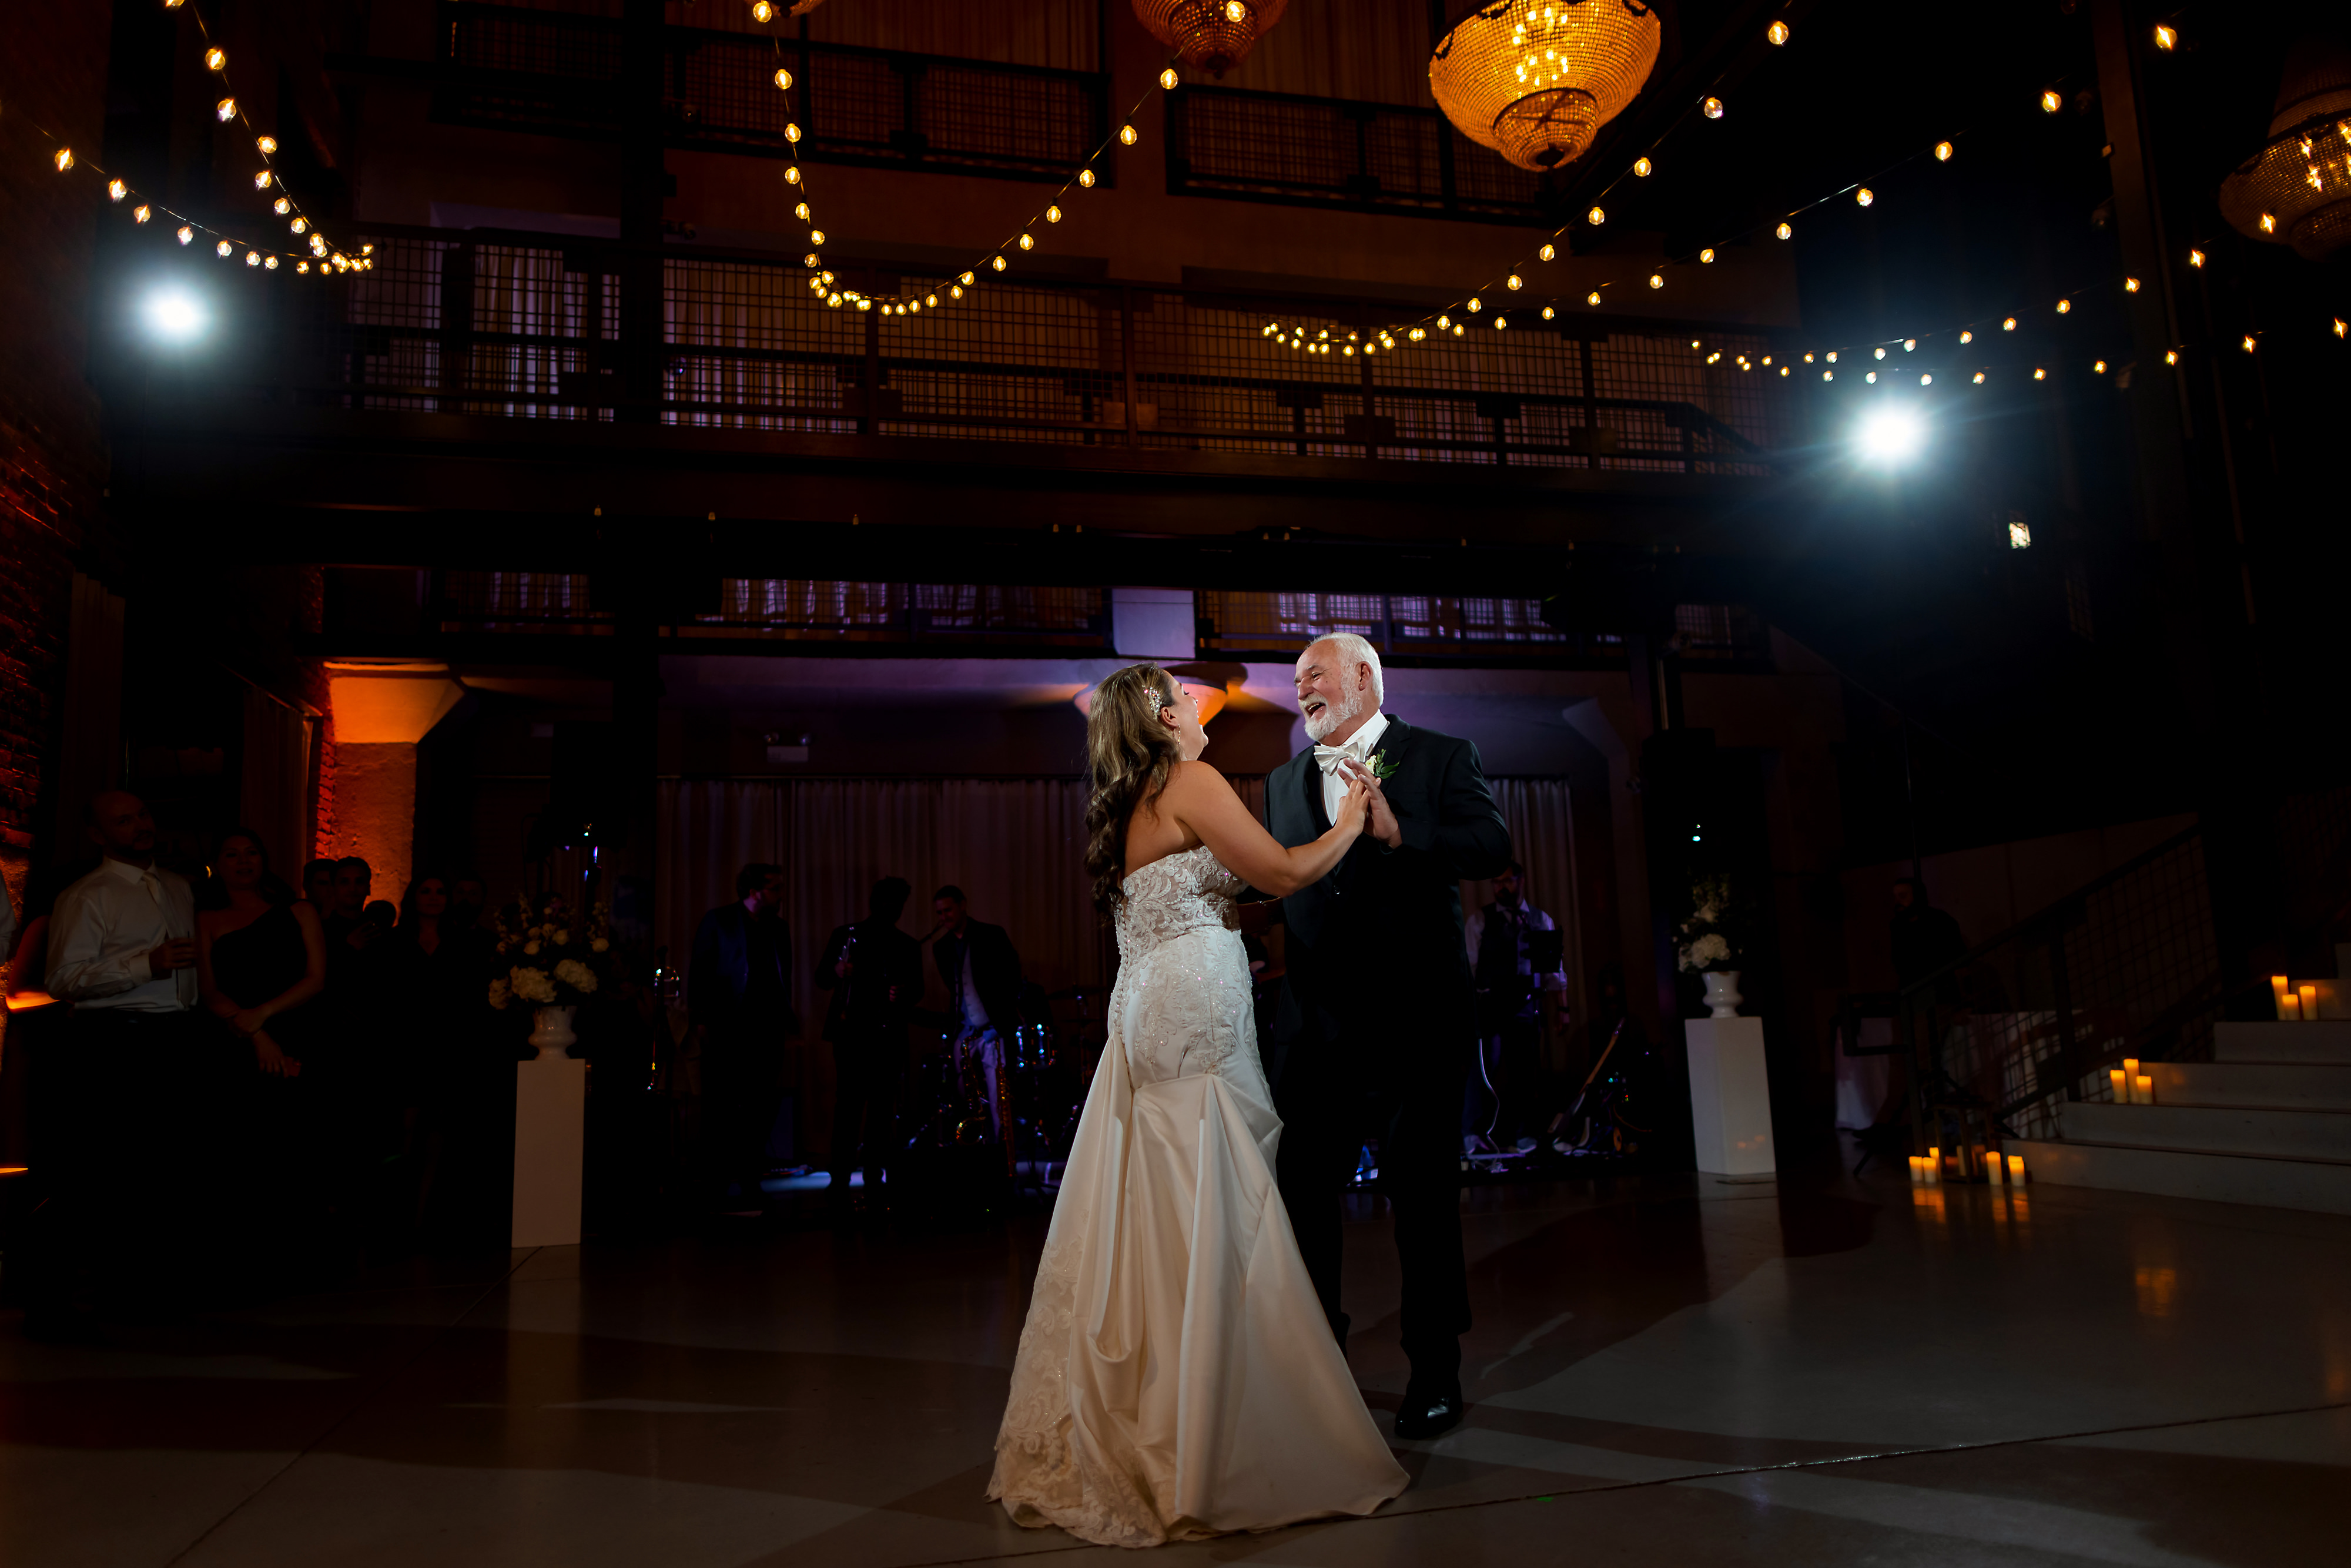 Bride dances with father during wedding reception at Artifact Events in Chicago.